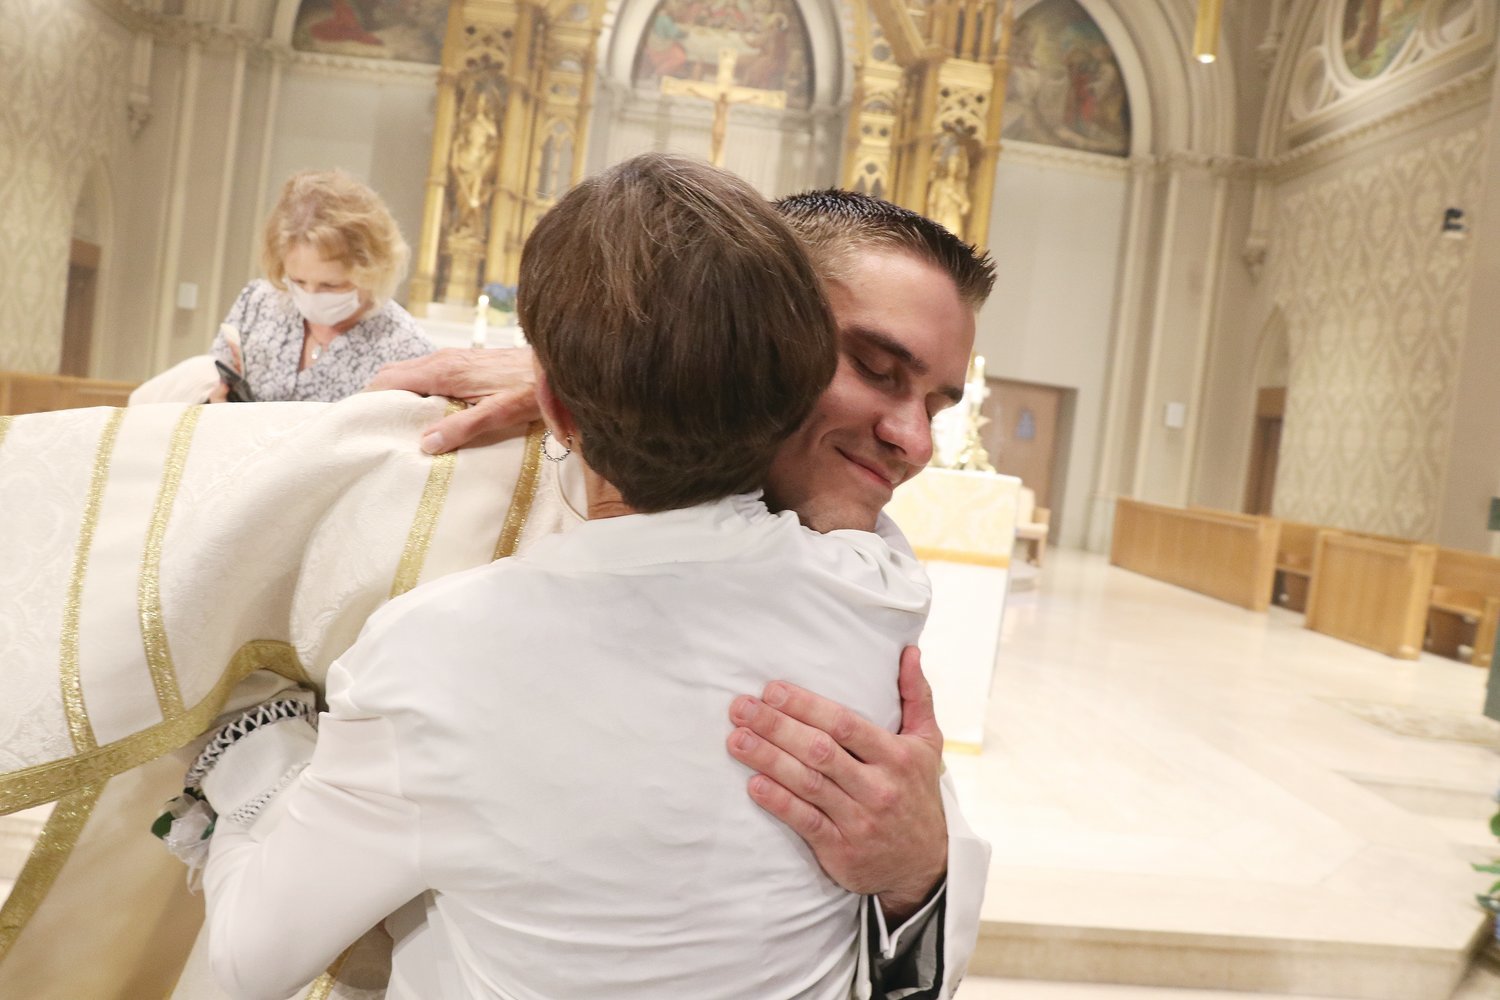 Deacon Gadoury shares a loving moment with his mother, Cheryll Gadoury, following his ordination.